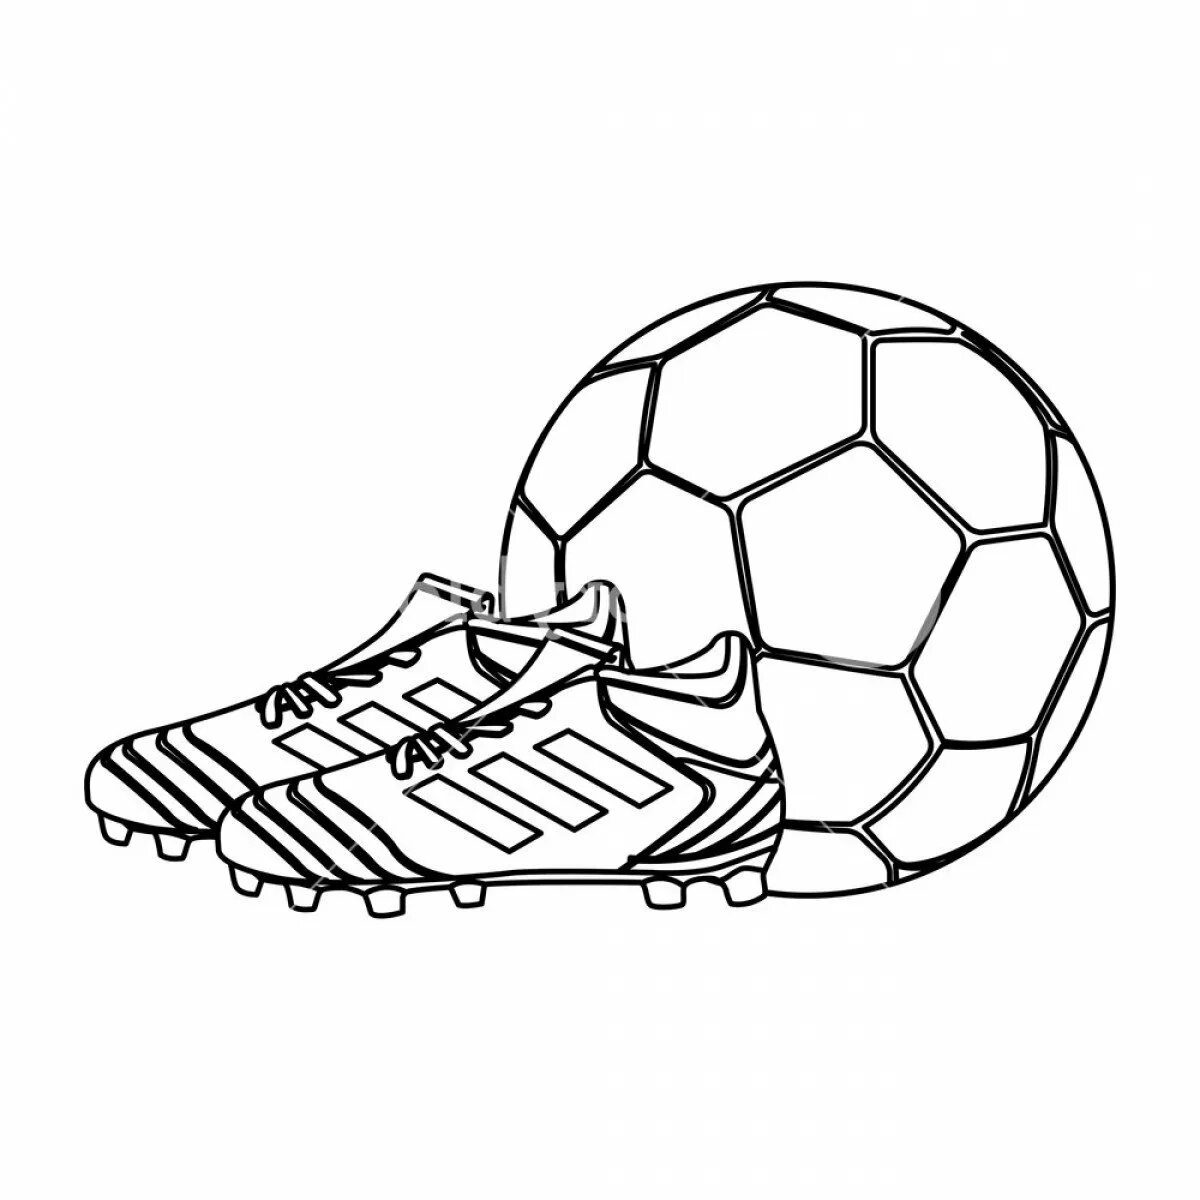 Nike fat ball coloring page